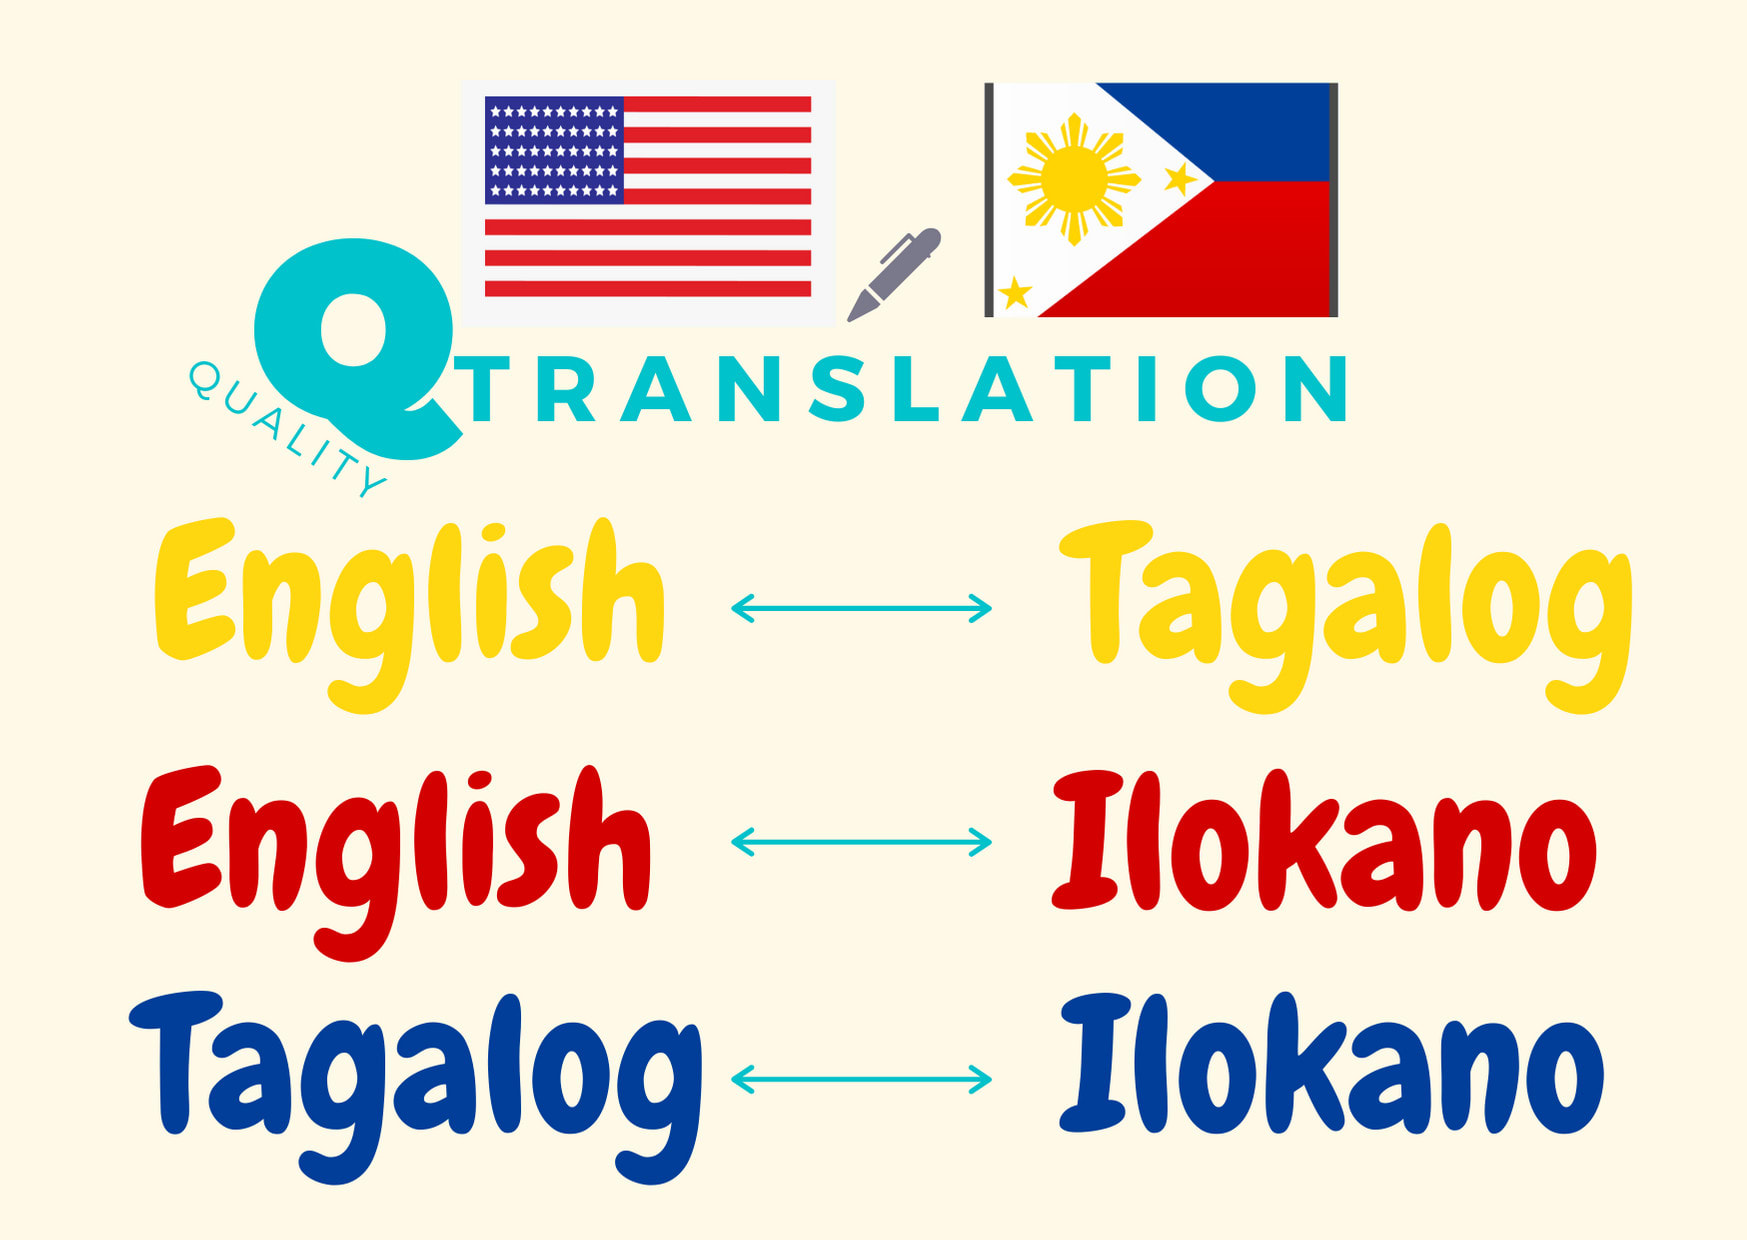 English to tagalog translate to Function In